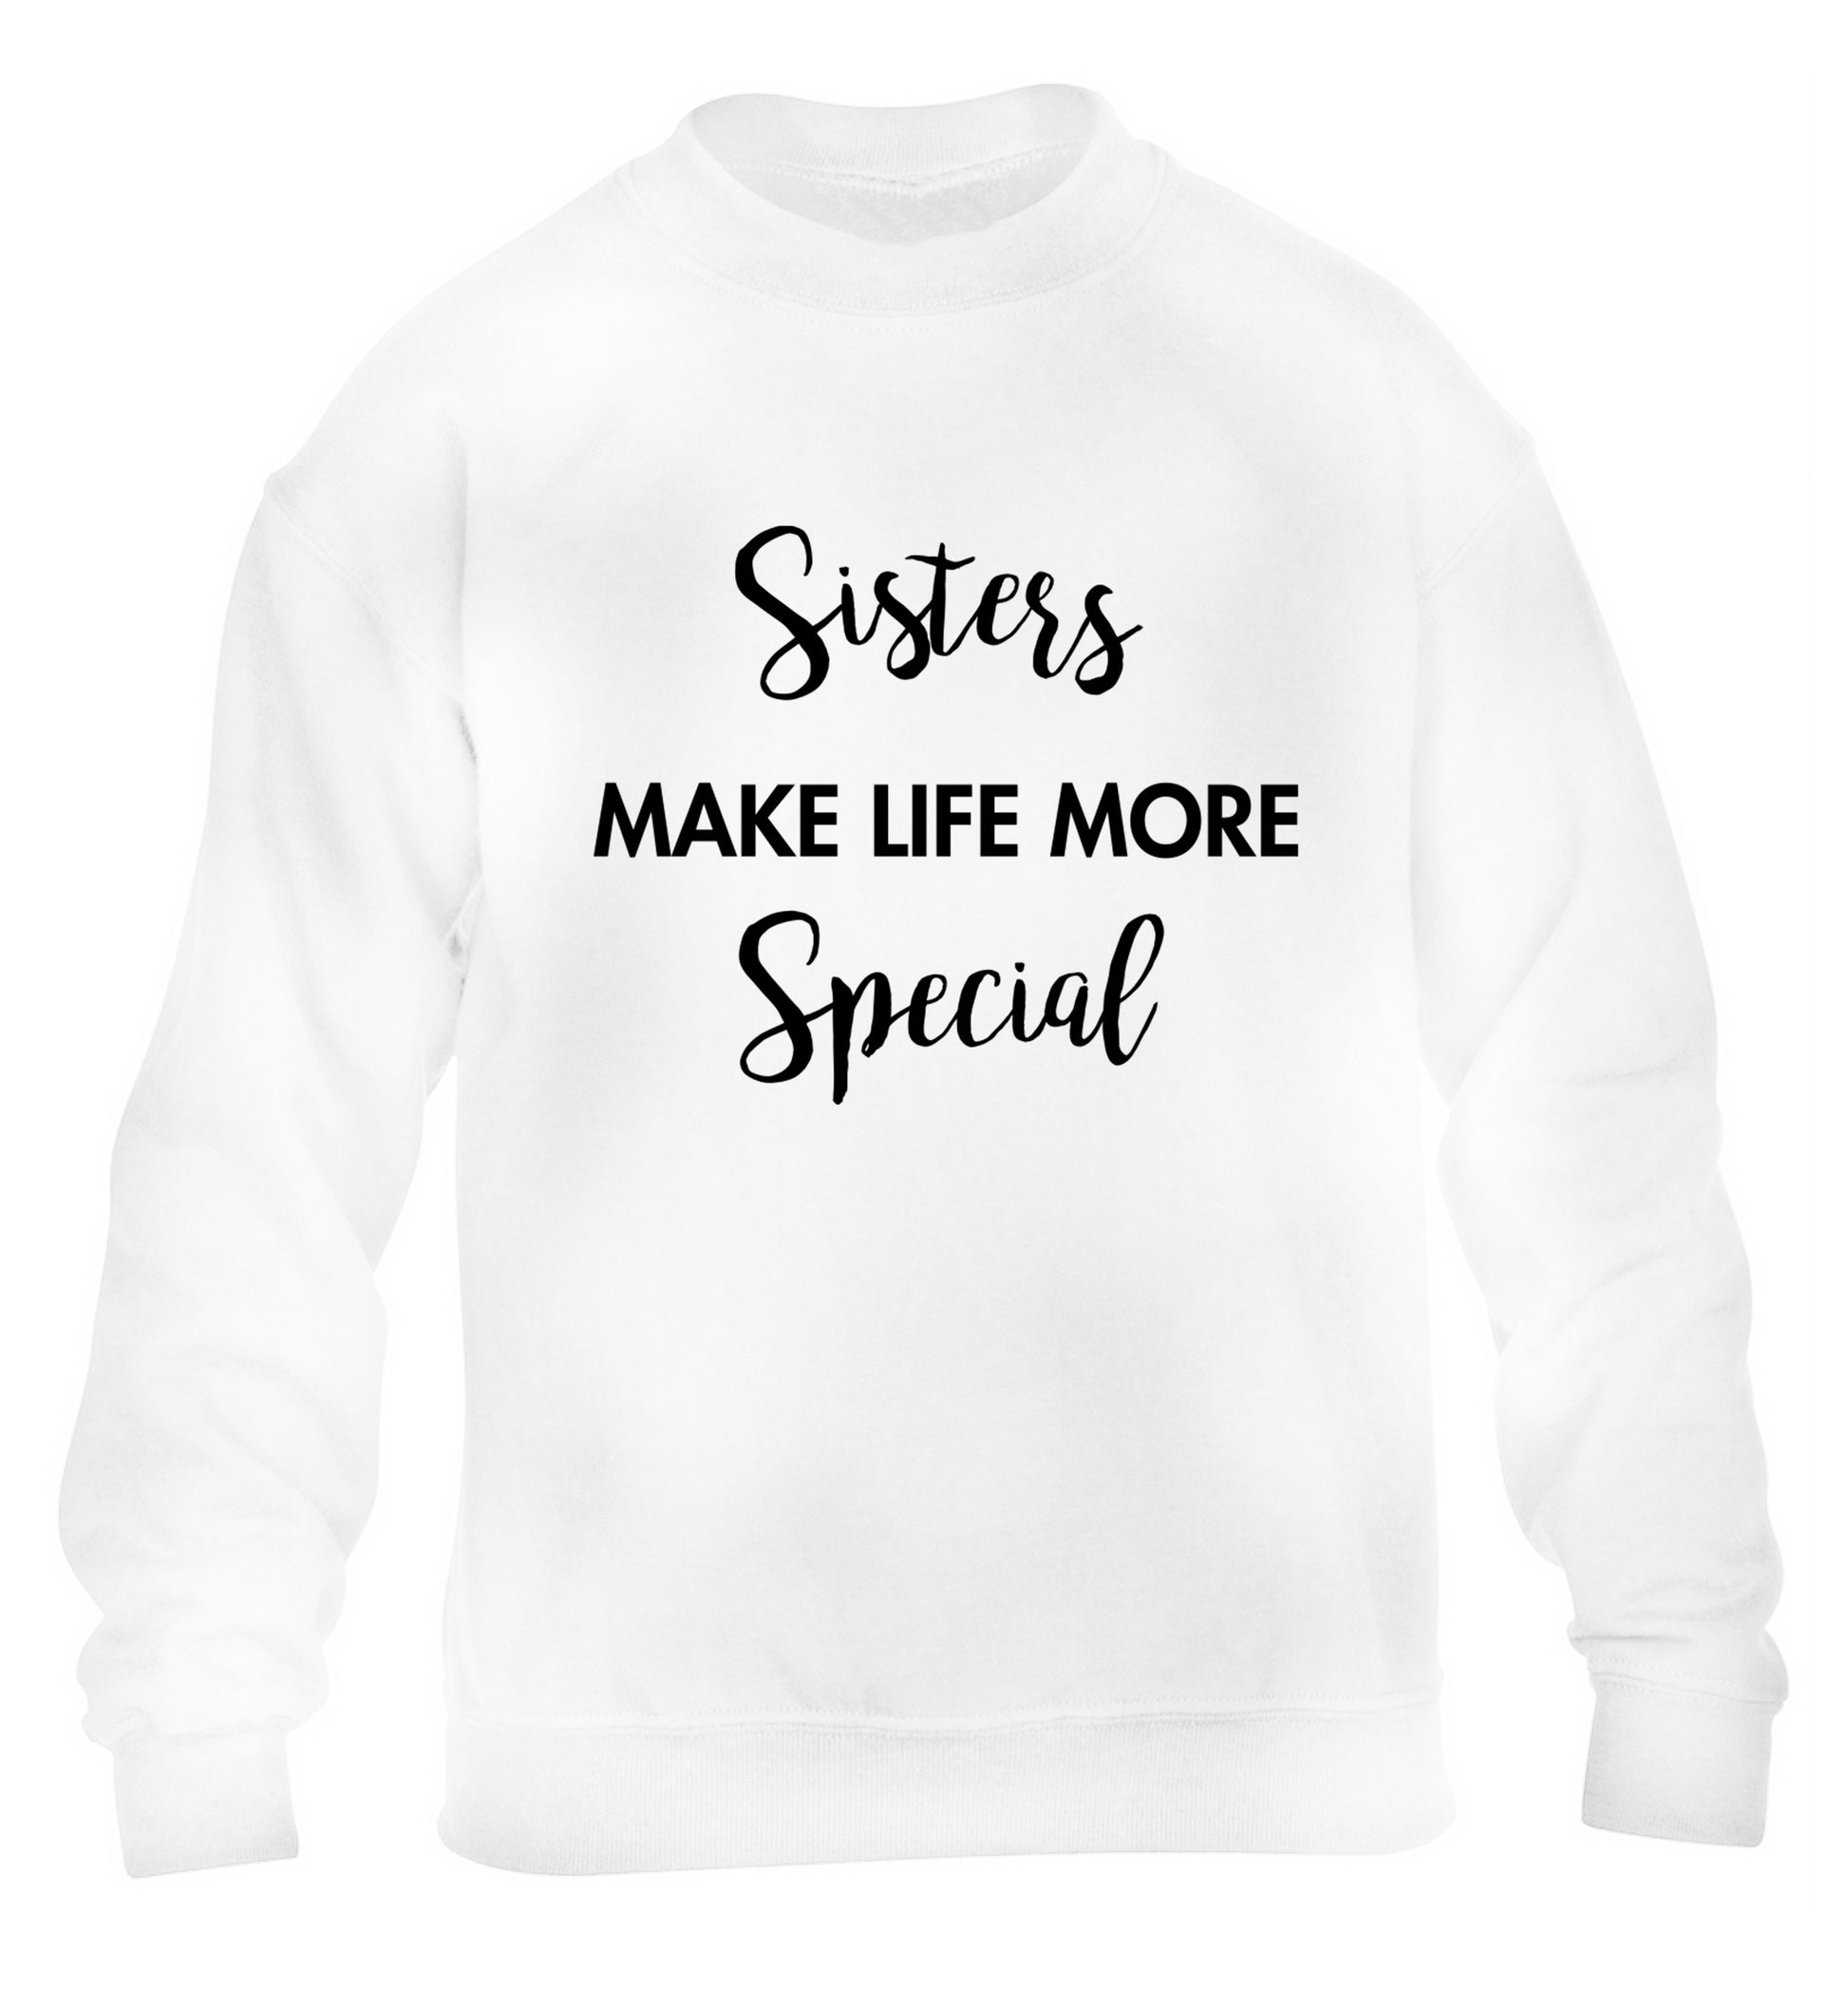 Sisters make life more special children's white sweater 12-14 Years